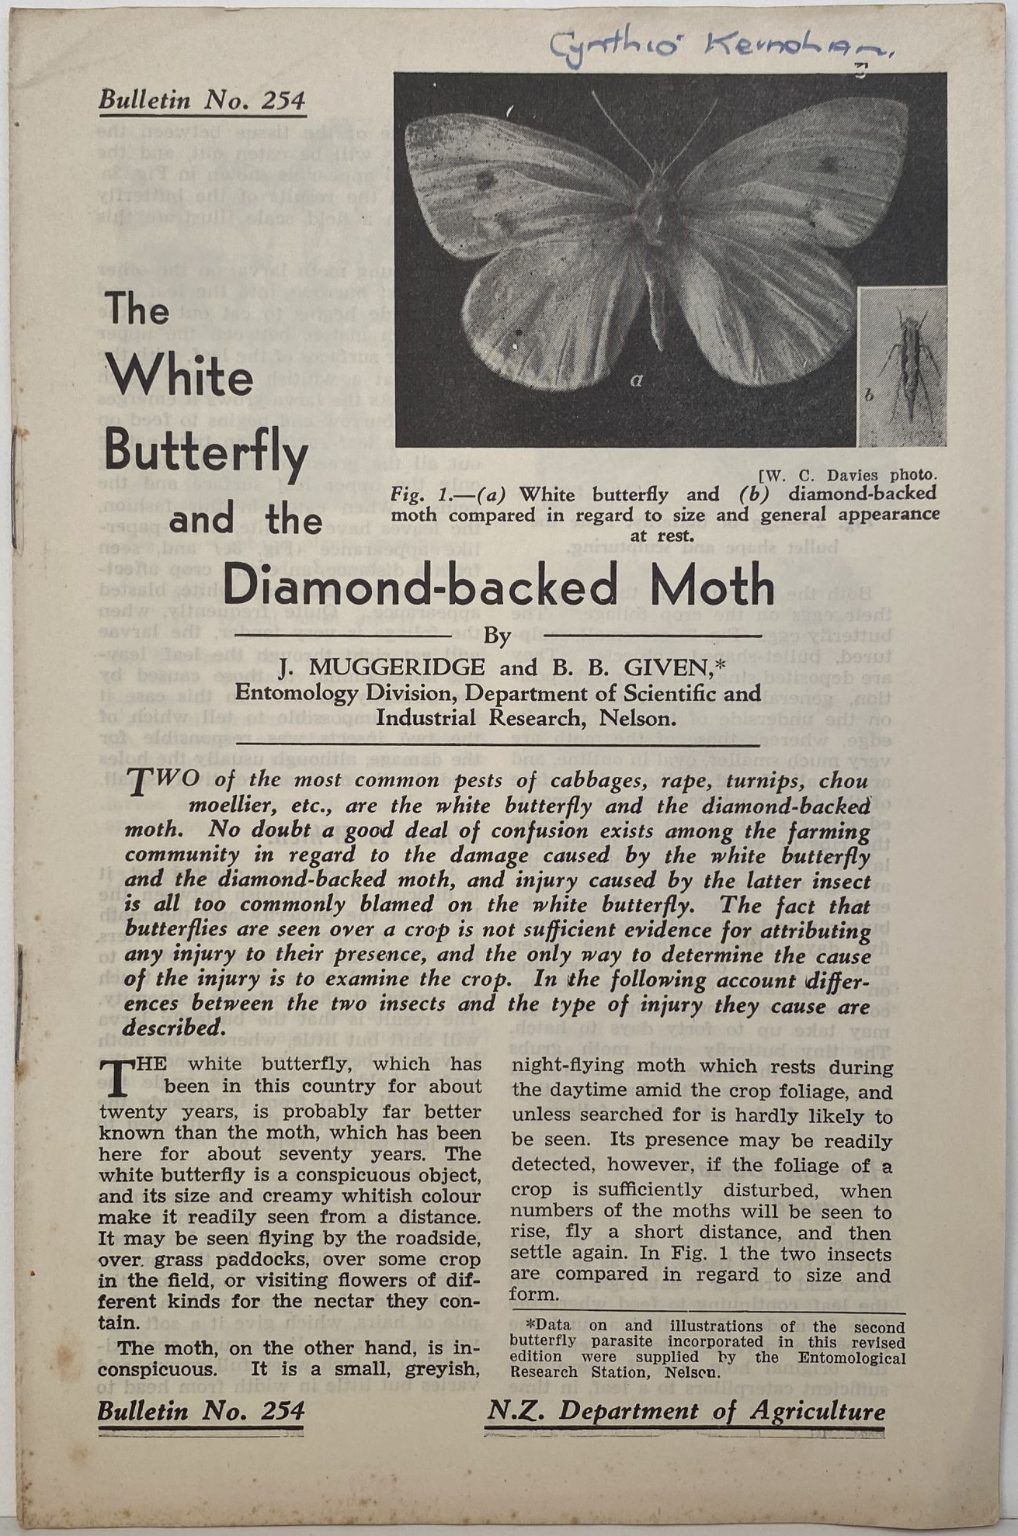 The White Butterfly and the Diamond-backed Moth: Bulletin No. 254